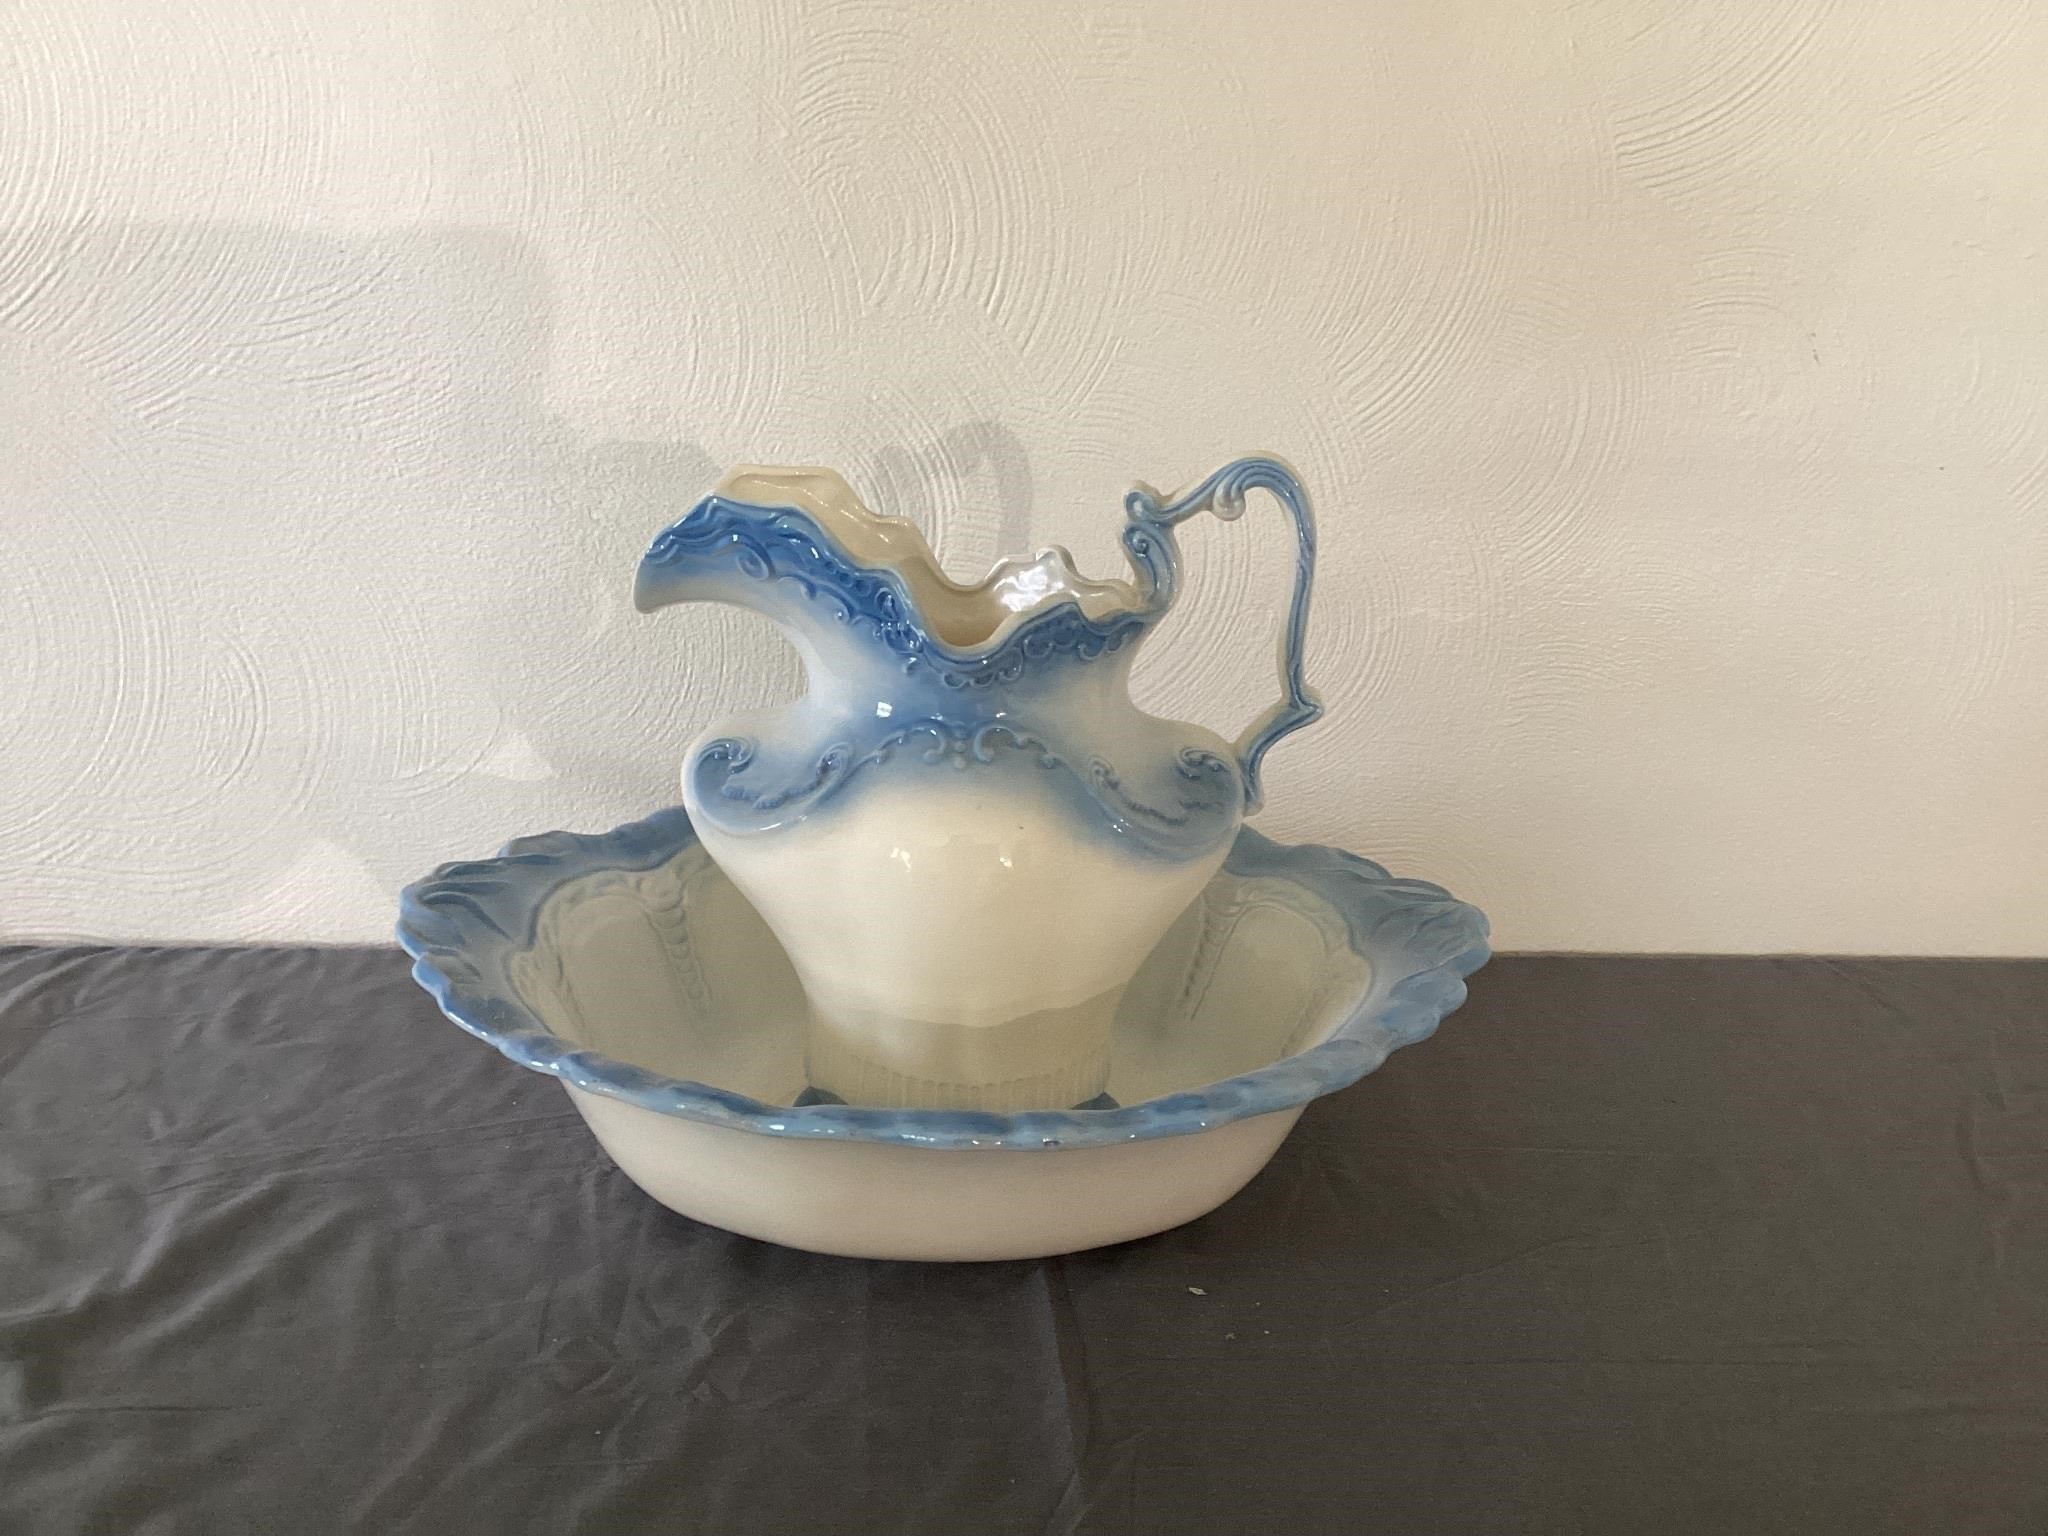 Vintage Arnel's Water Pitcher and bowl